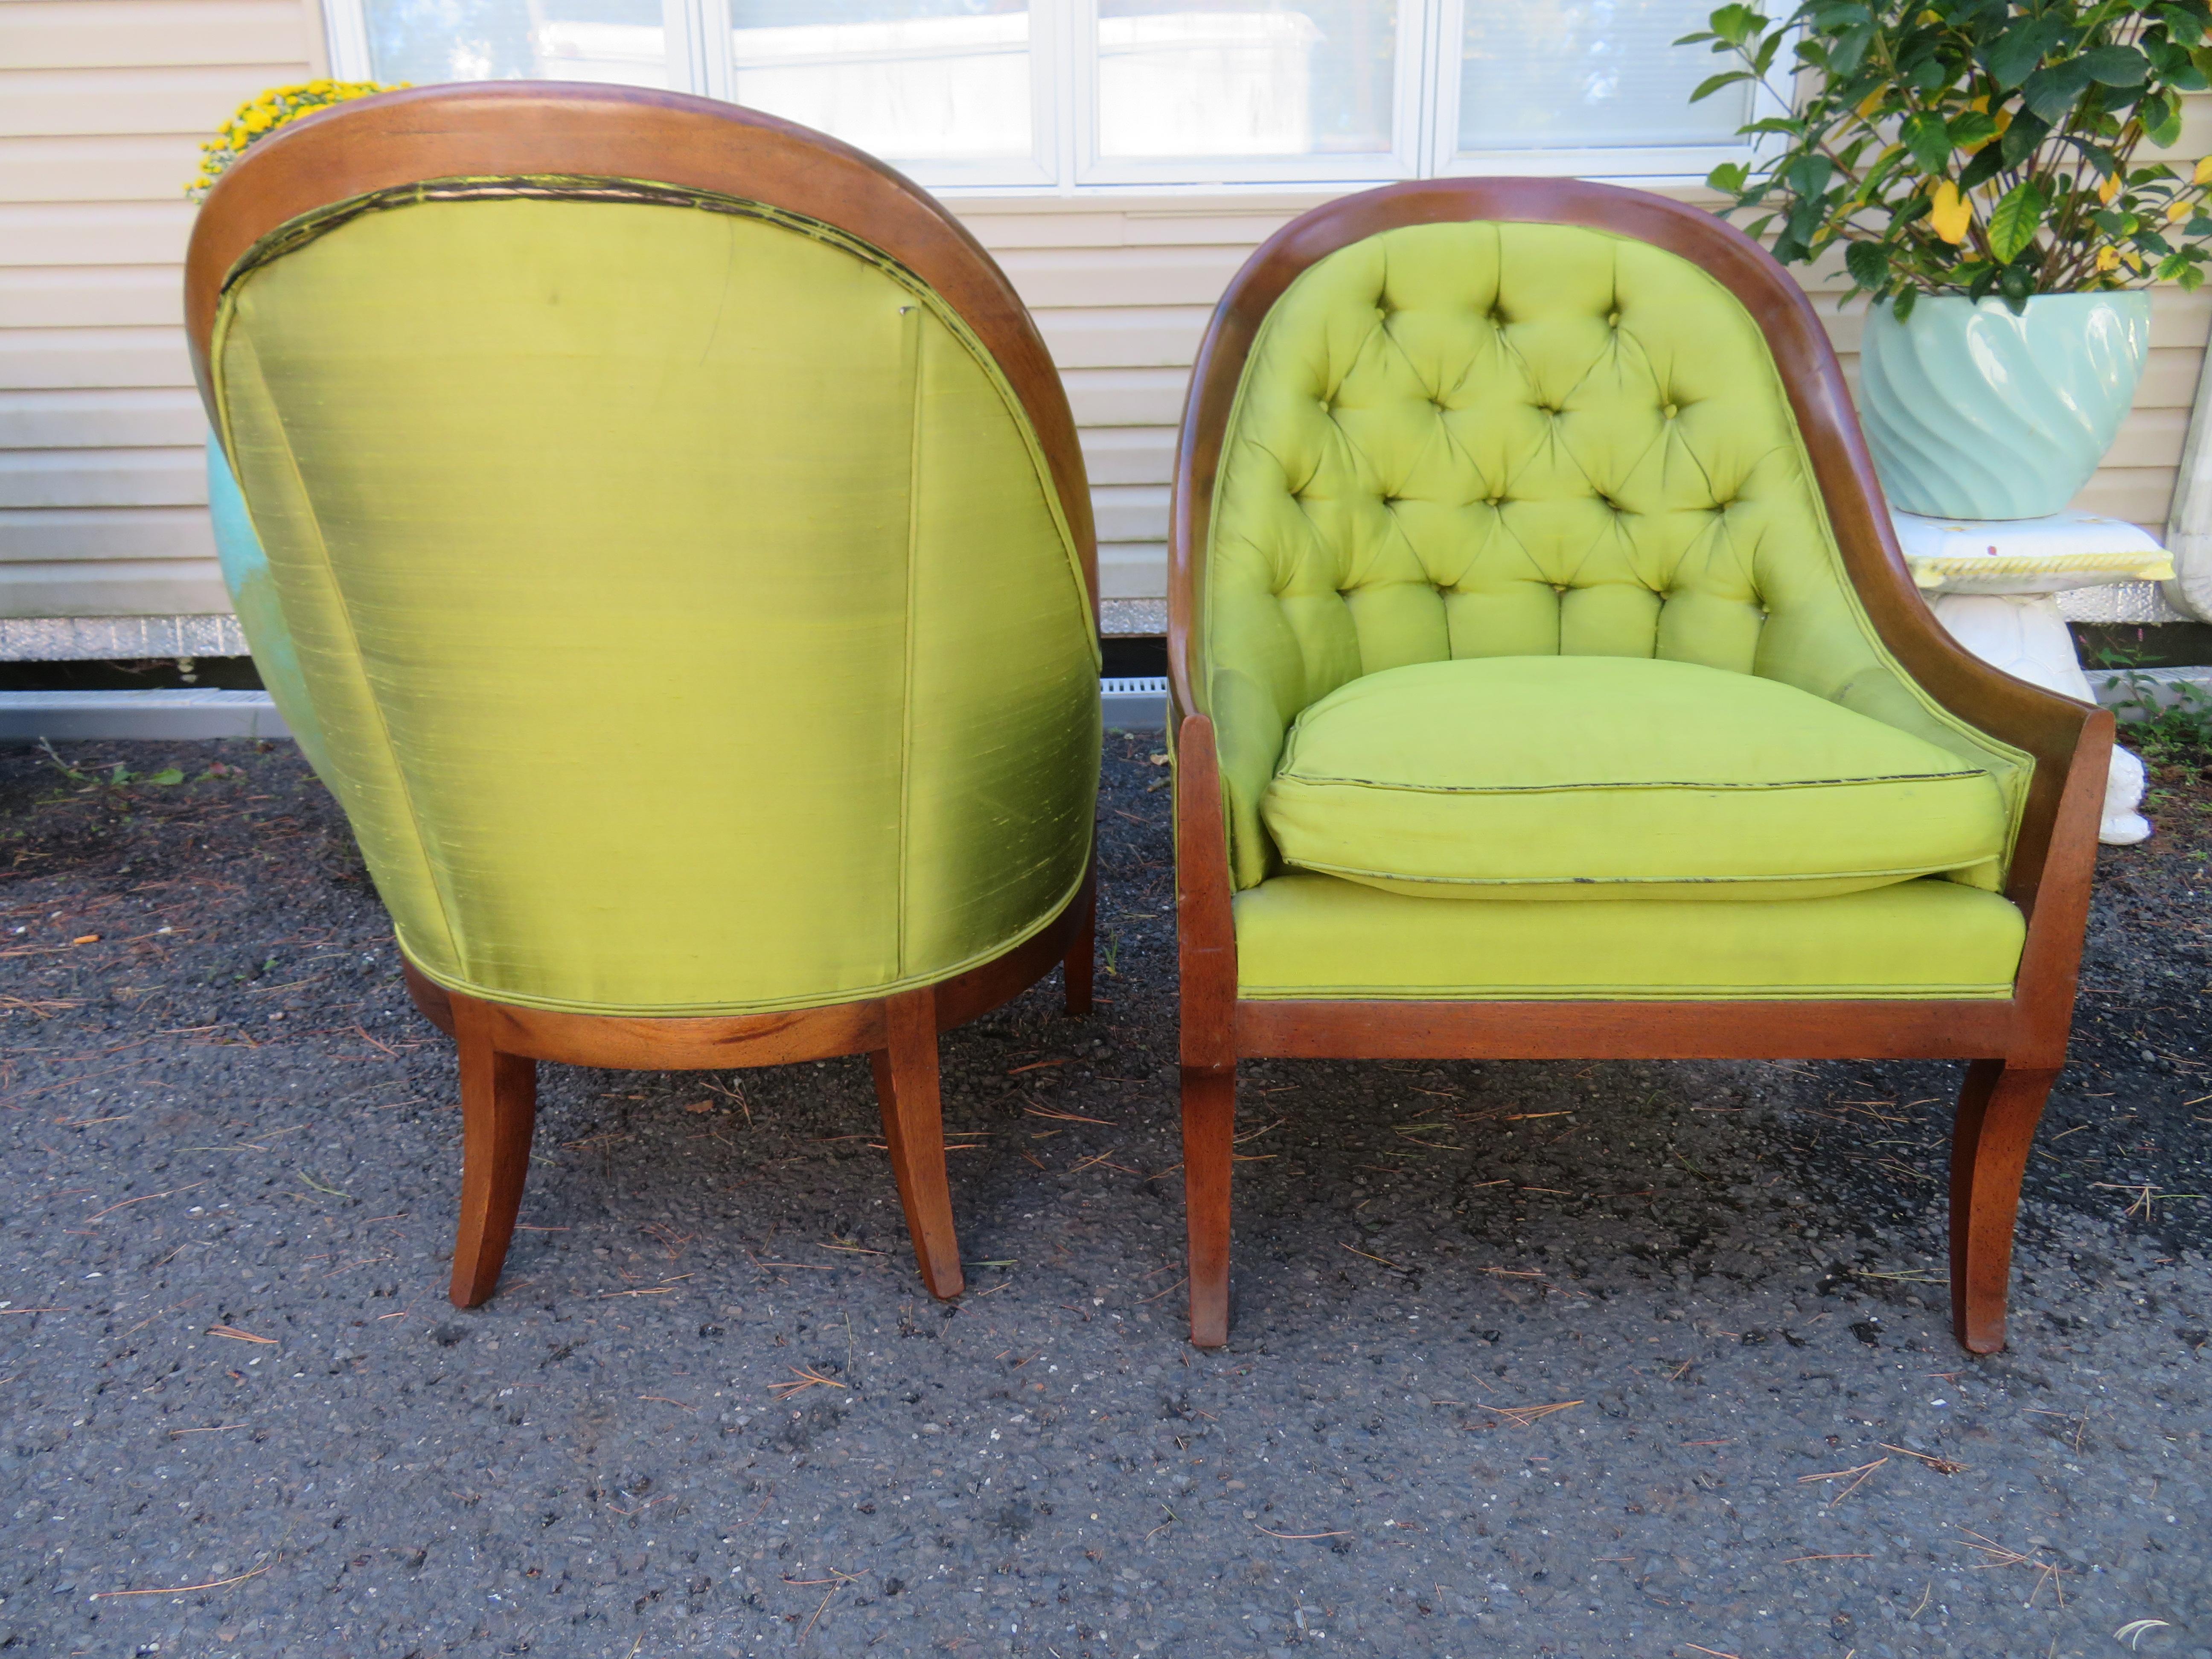 60s style chairs